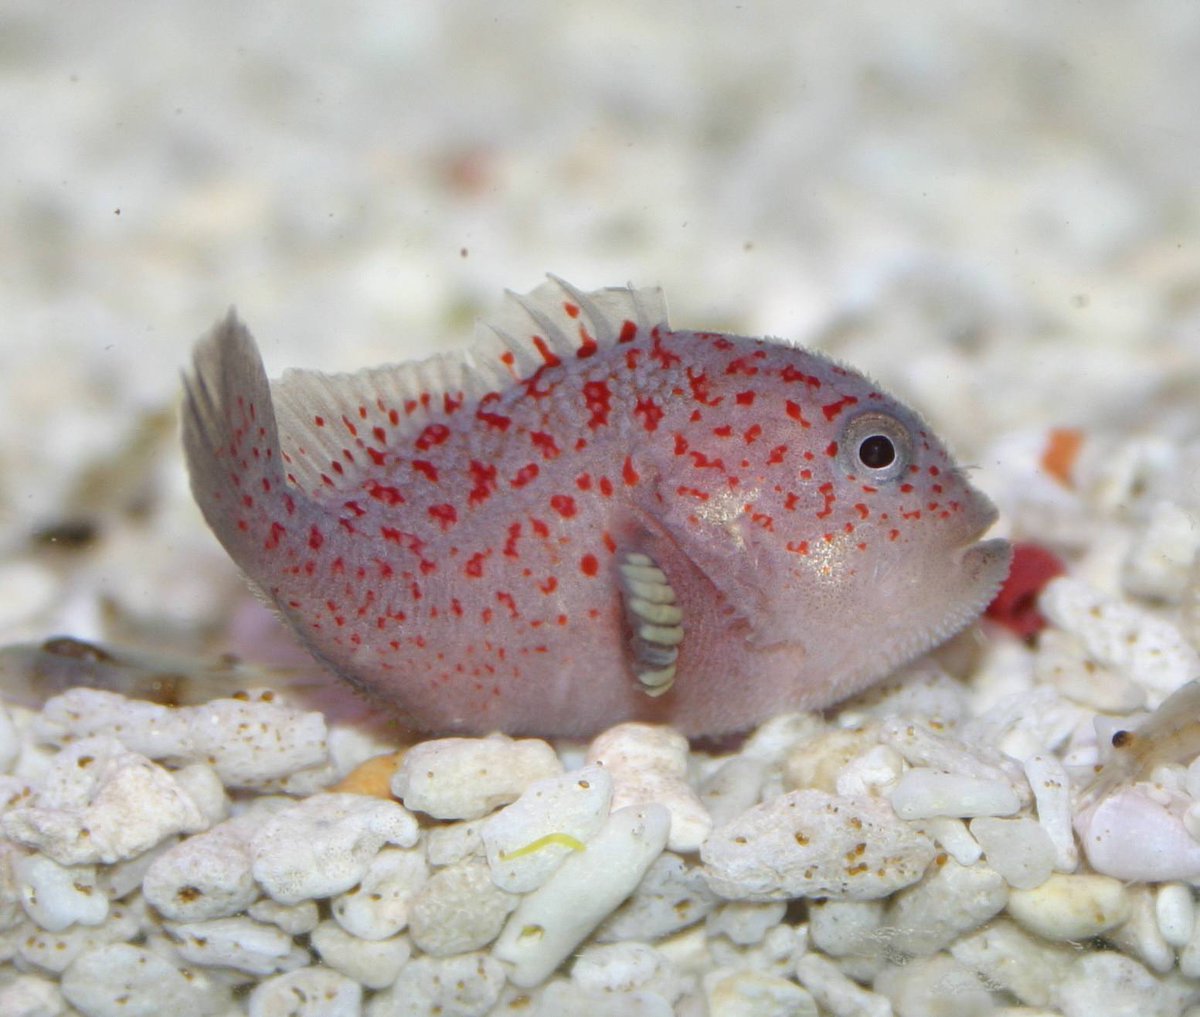 This is Caracanthus, a species of scorpaenid sometimes incorrectly known as the Gumdrop Goby. It is the laughing stock of the scorpionfish family, and is neither a gumdrop, nor a goby. If you find one growing on your body you should probably get that checked. genitalwart/10